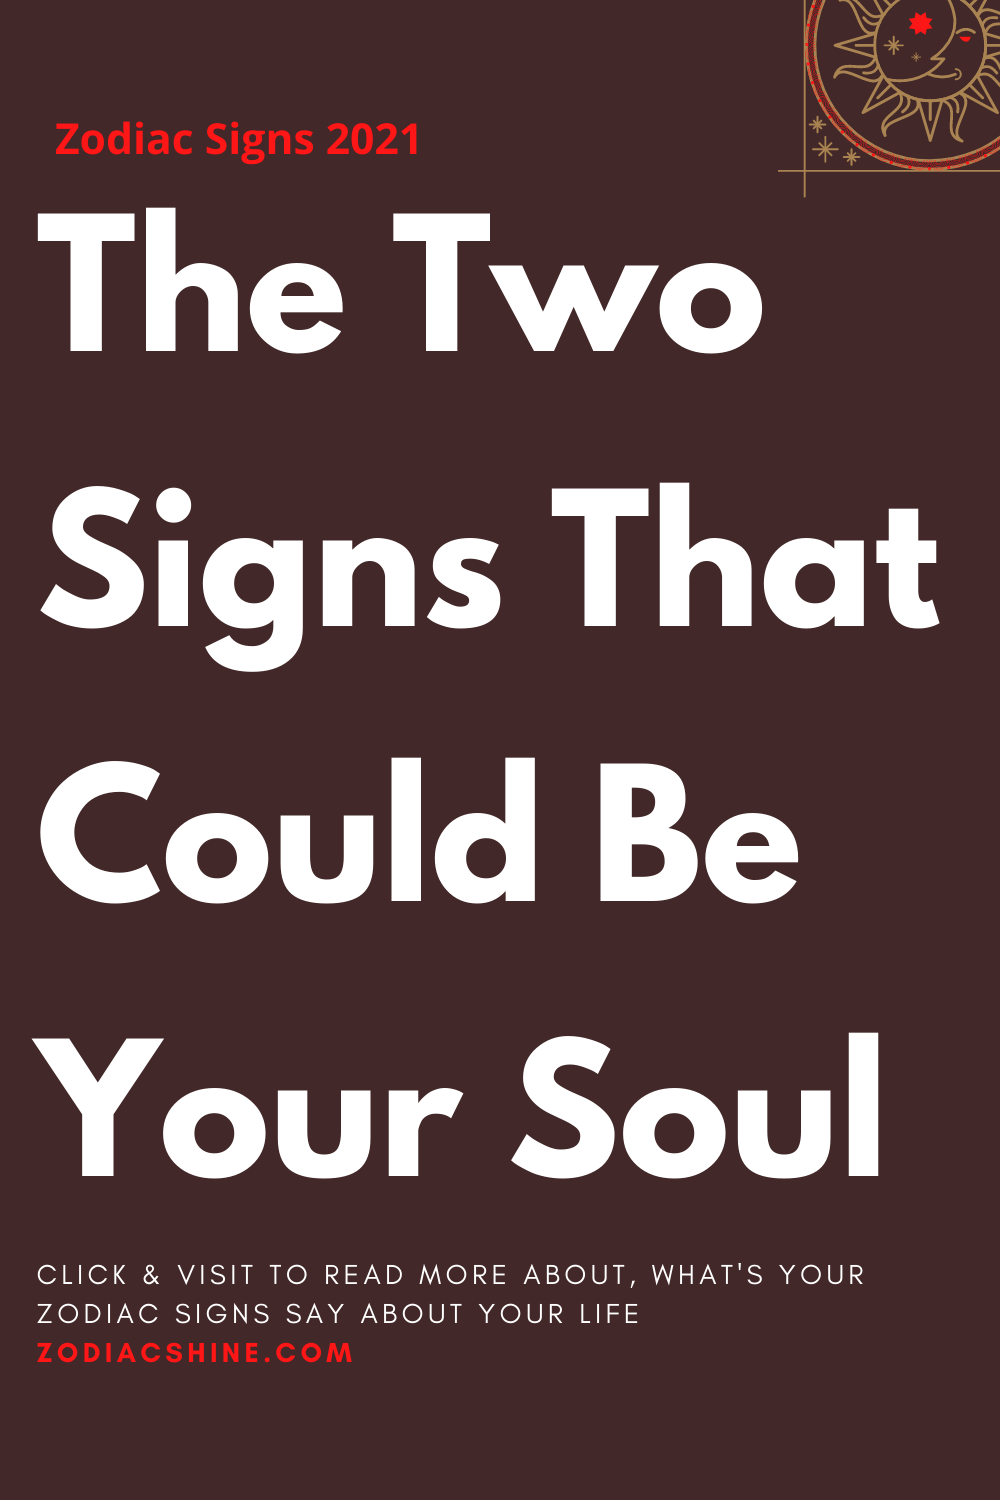 The Two Signs That Could Be Your Soul